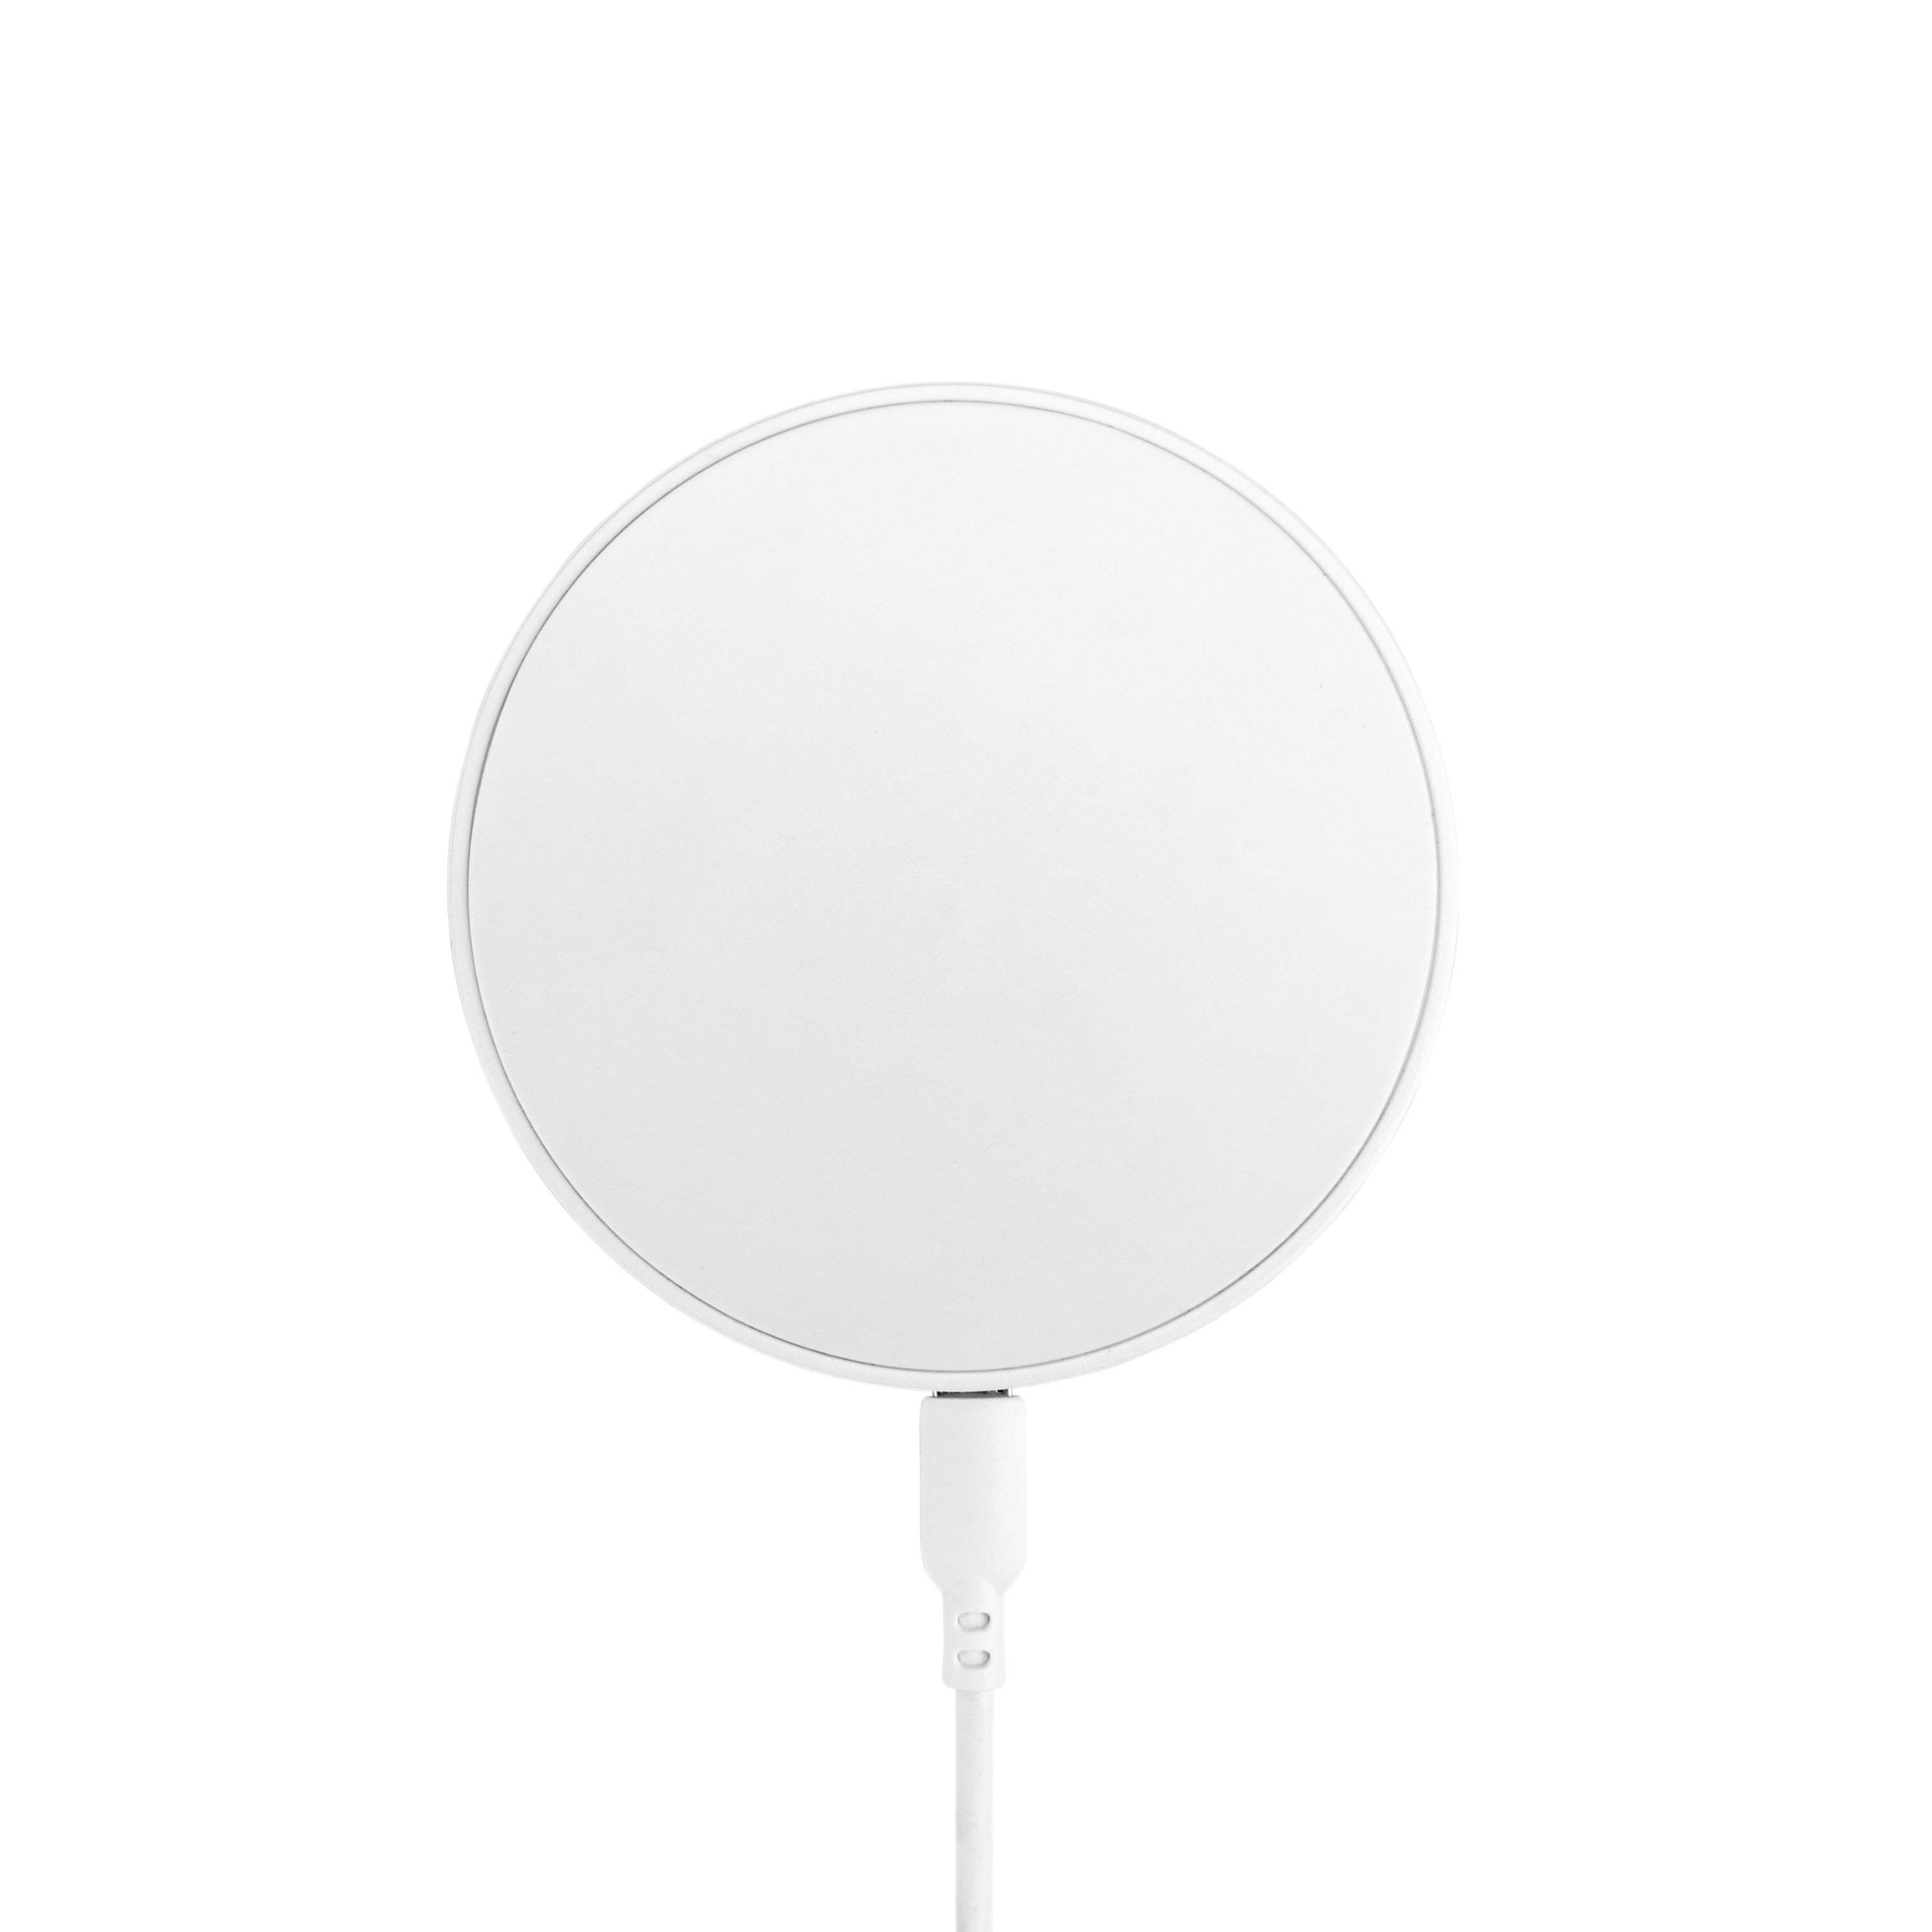 onn. 5W Wireless Charging Pad Compatible with All Qi Enabled Devices